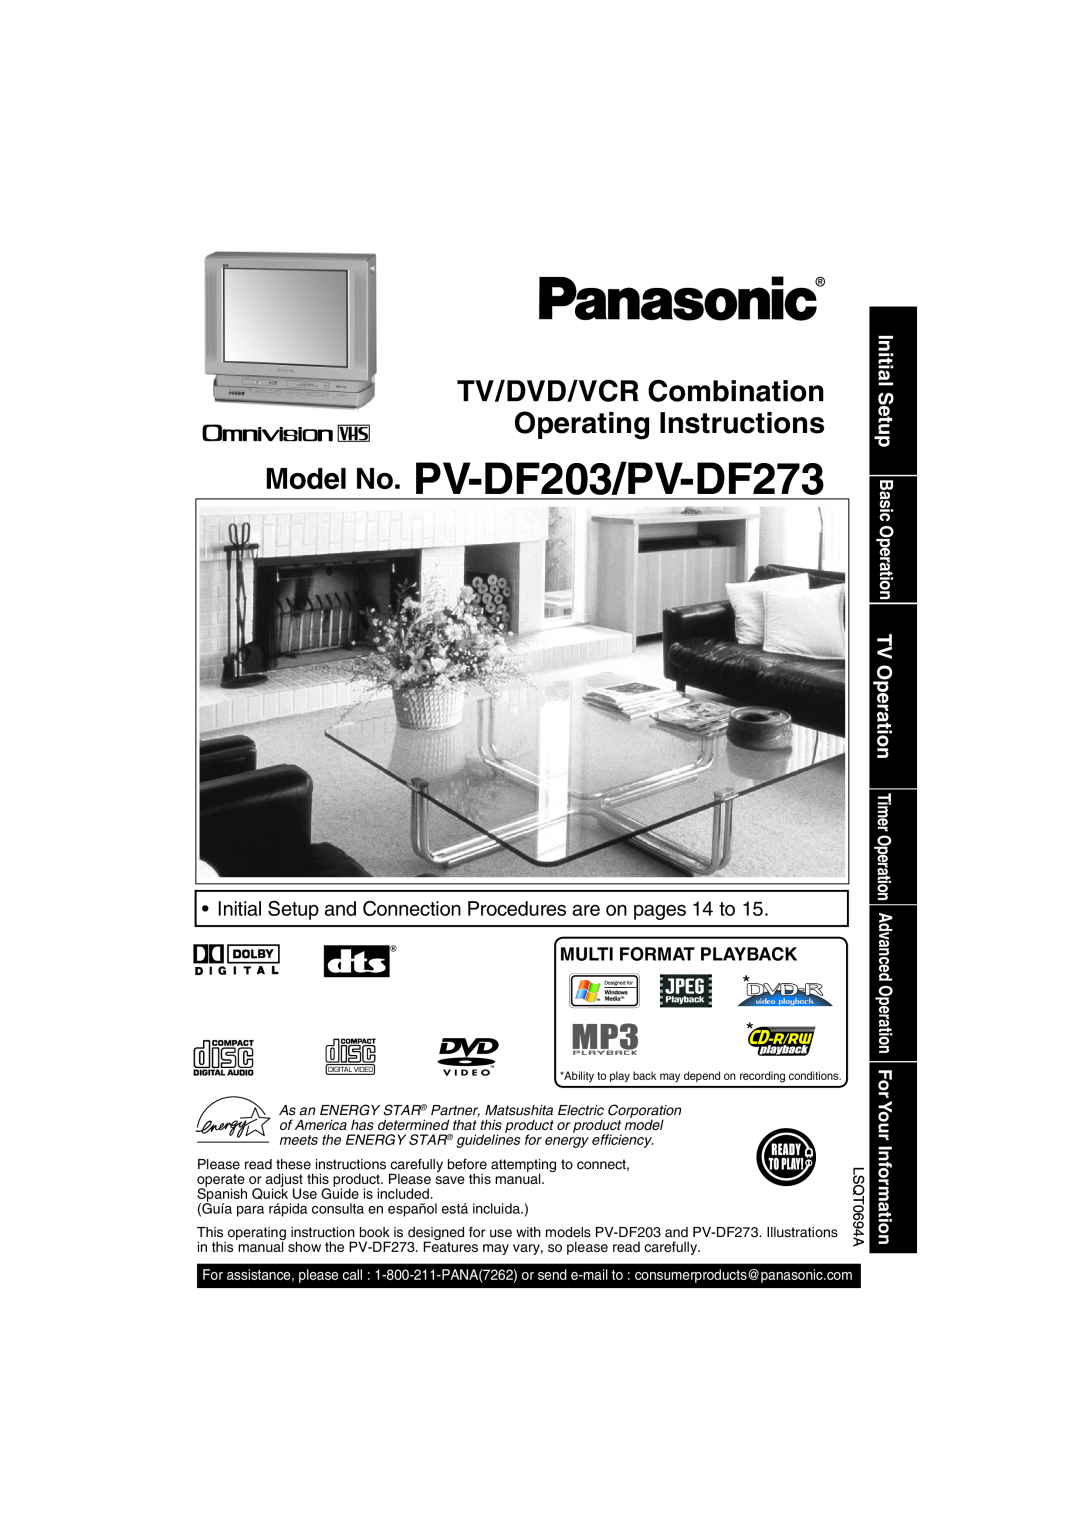 Panasonic PV-DF273 manual Initial Setup Basic Operation TV Operation, Multi Format Playback, For Your Information 